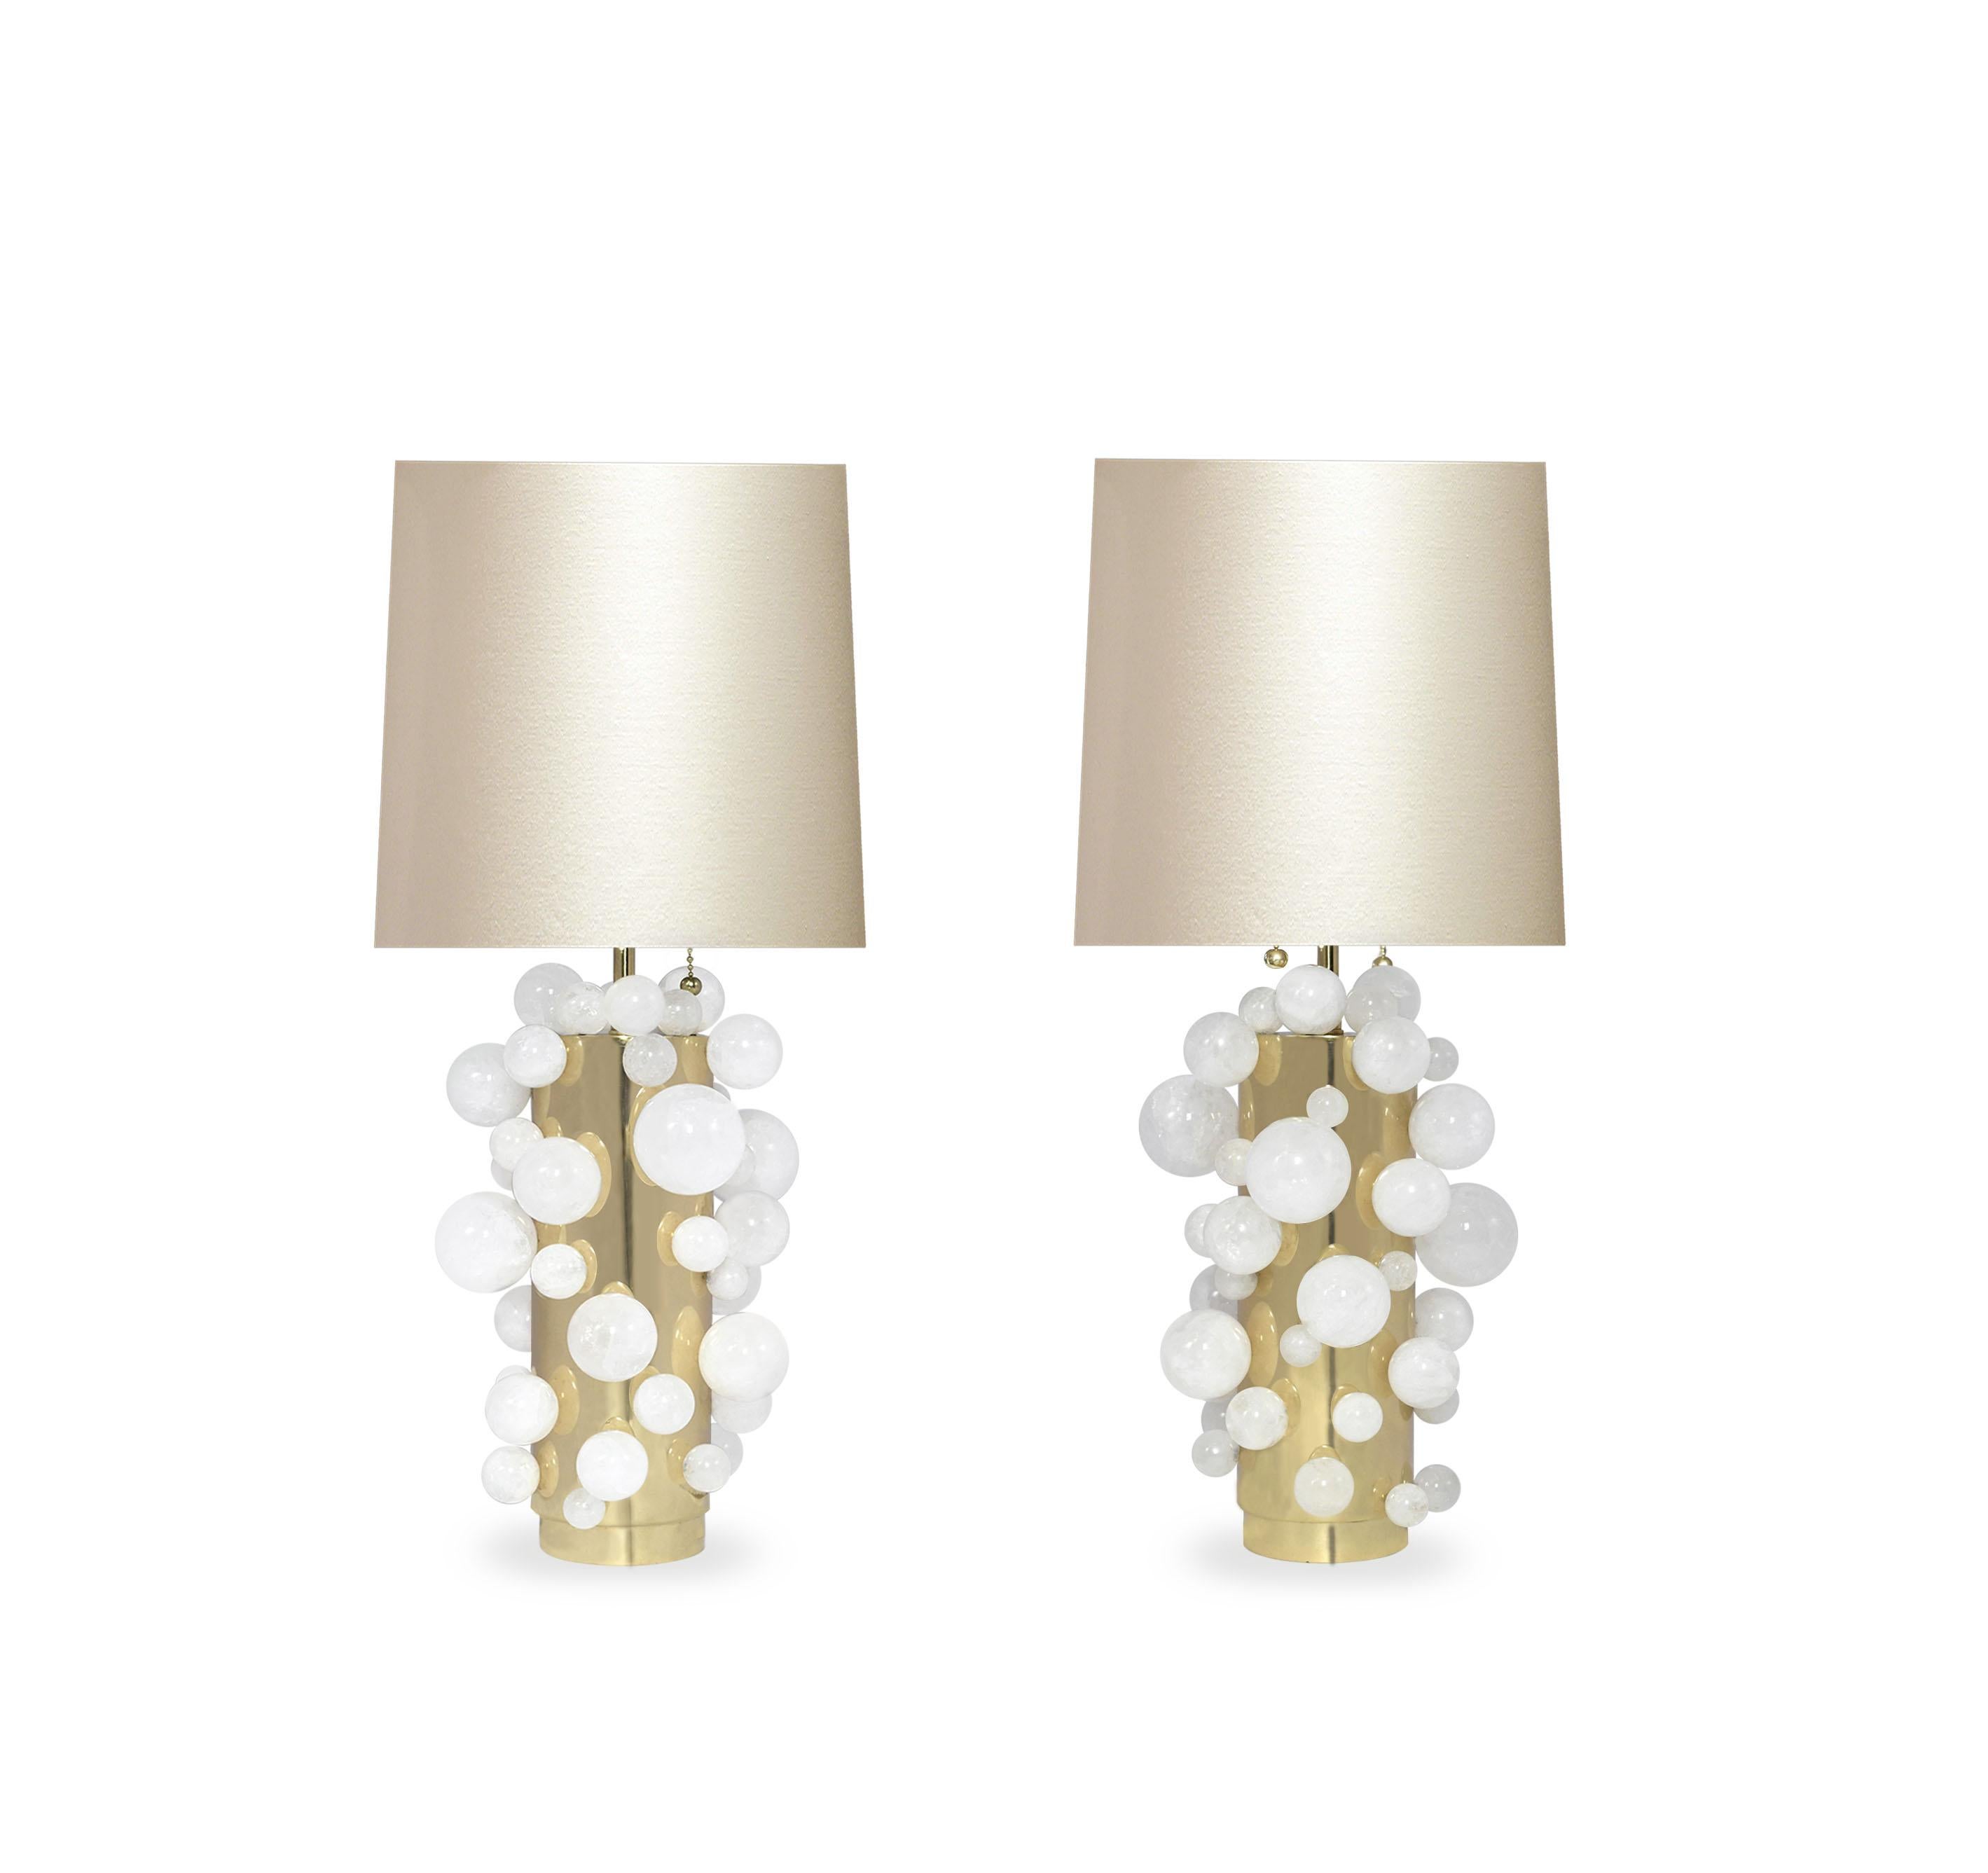 A pair of luxury white rock crystal quartz bulb lamps with polished brass bases. Created by Phoenix Gallery, NYC.
To the top of rock crystal bubbles: 13